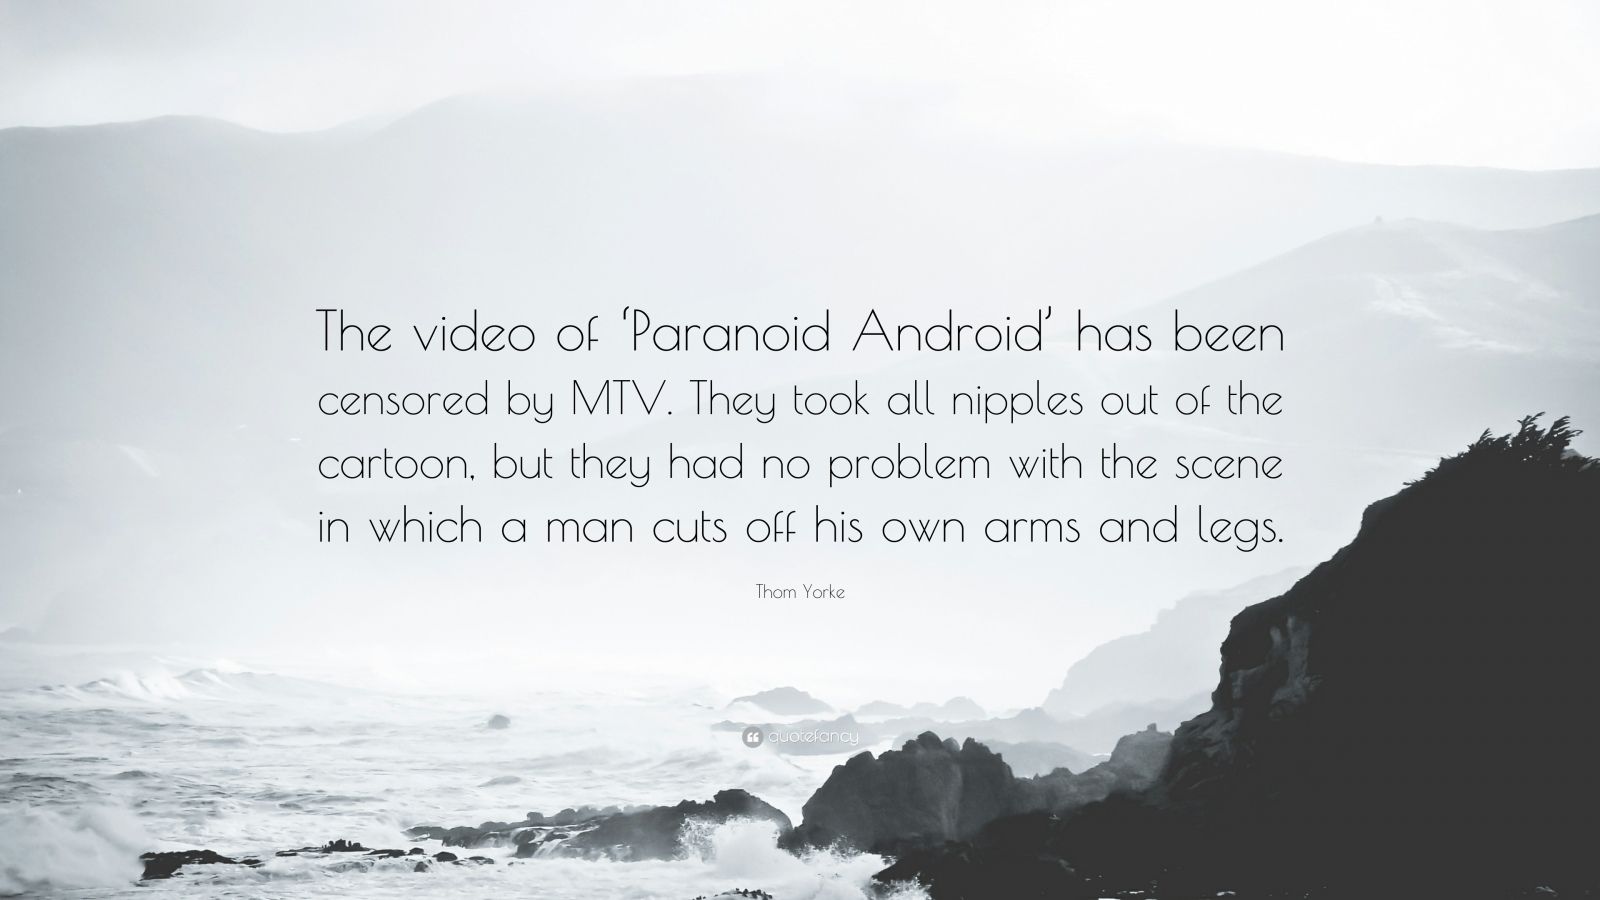 Thom Yorke Quote: “The video of 'Paranoid Android' has been censored by  MTV. They took all nipples out of the cartoon, but they had no prob...”